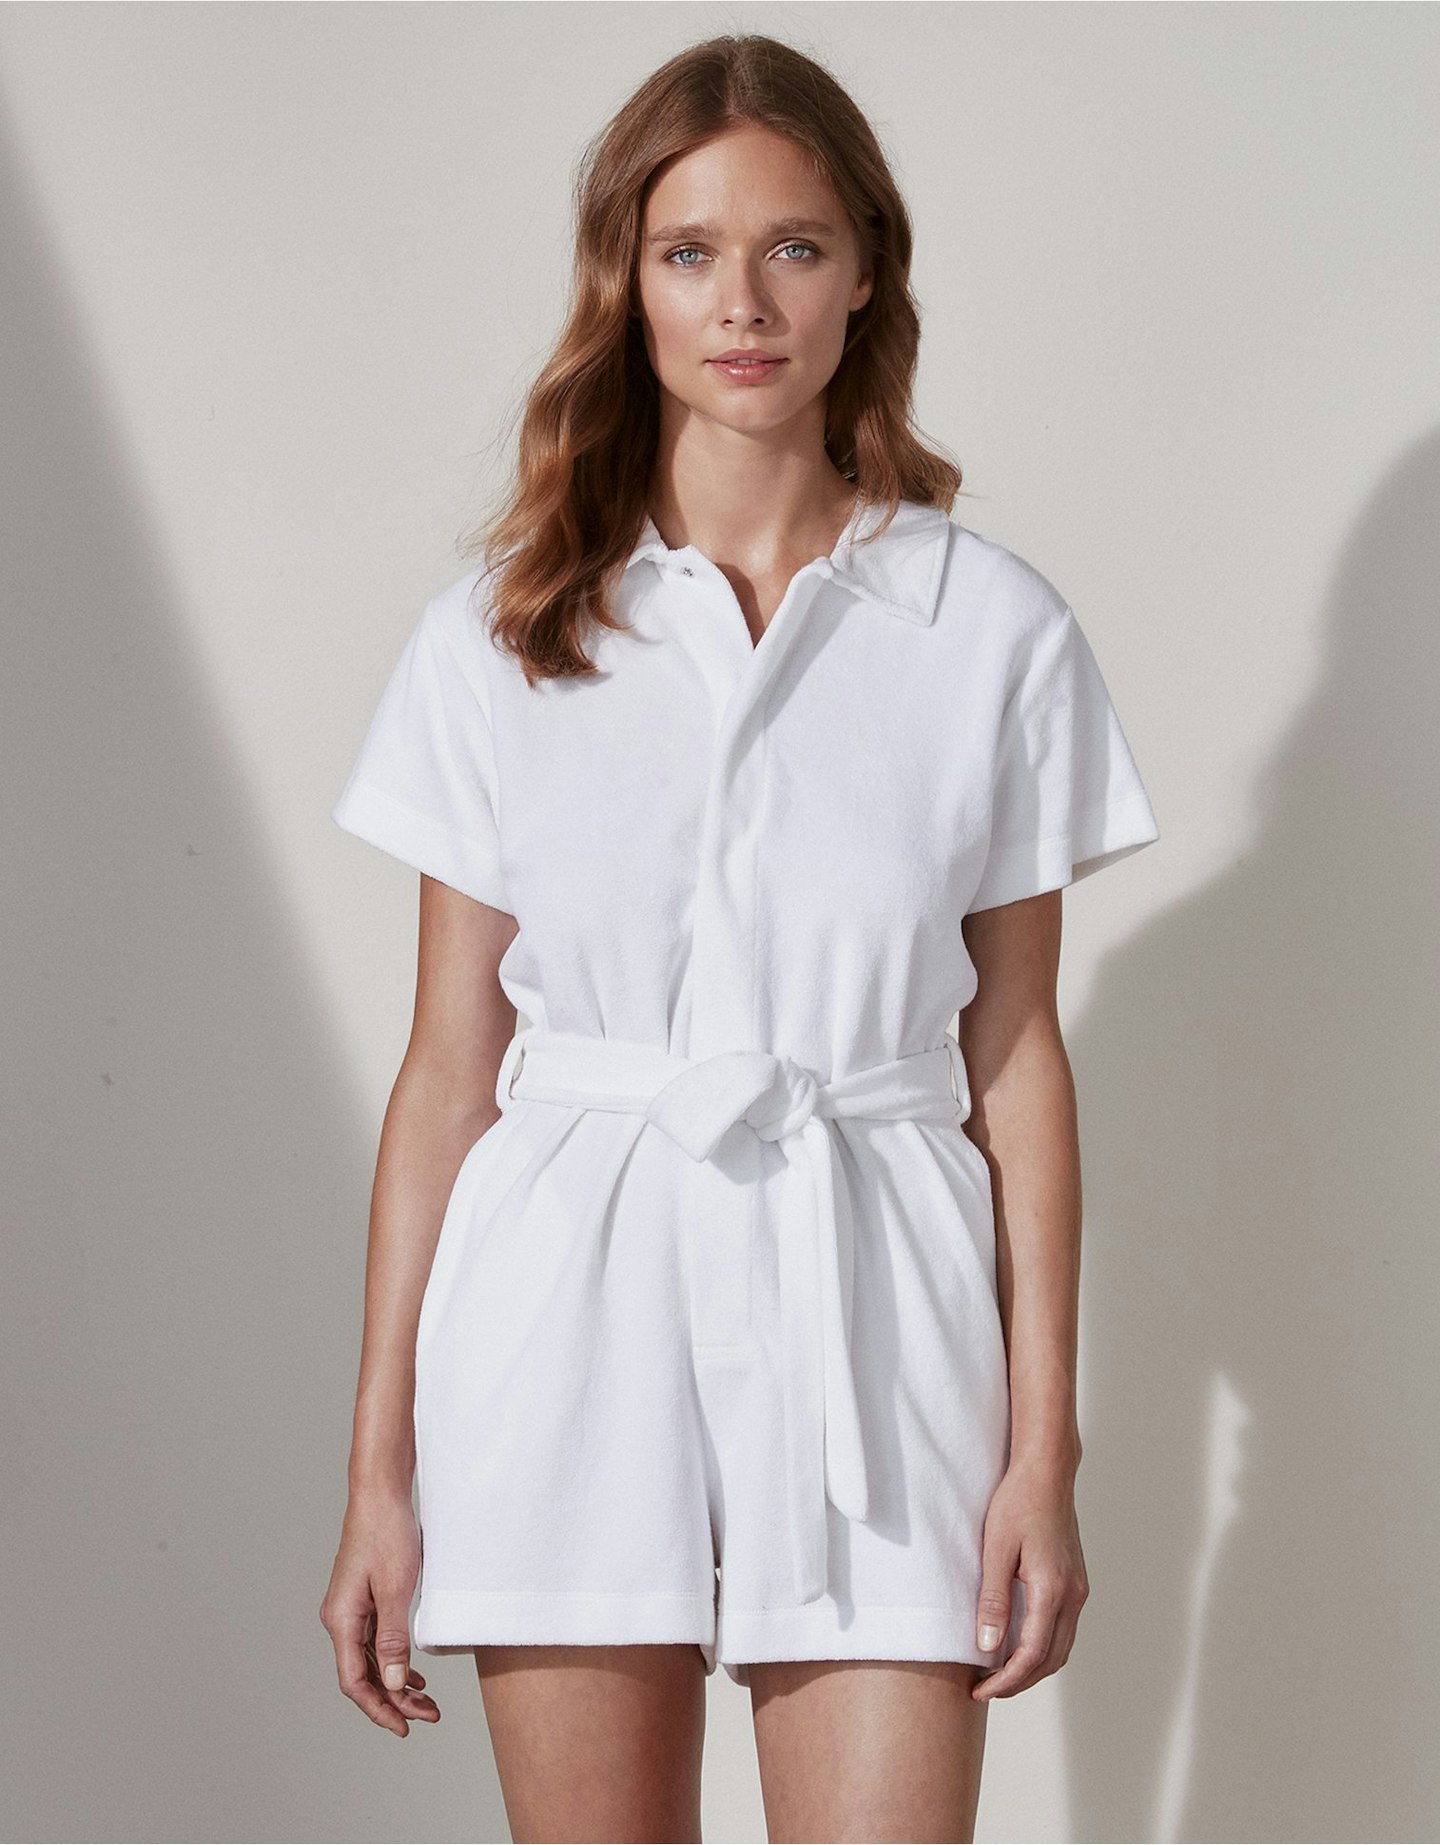 The White Company, Towelling Playsuit, £79